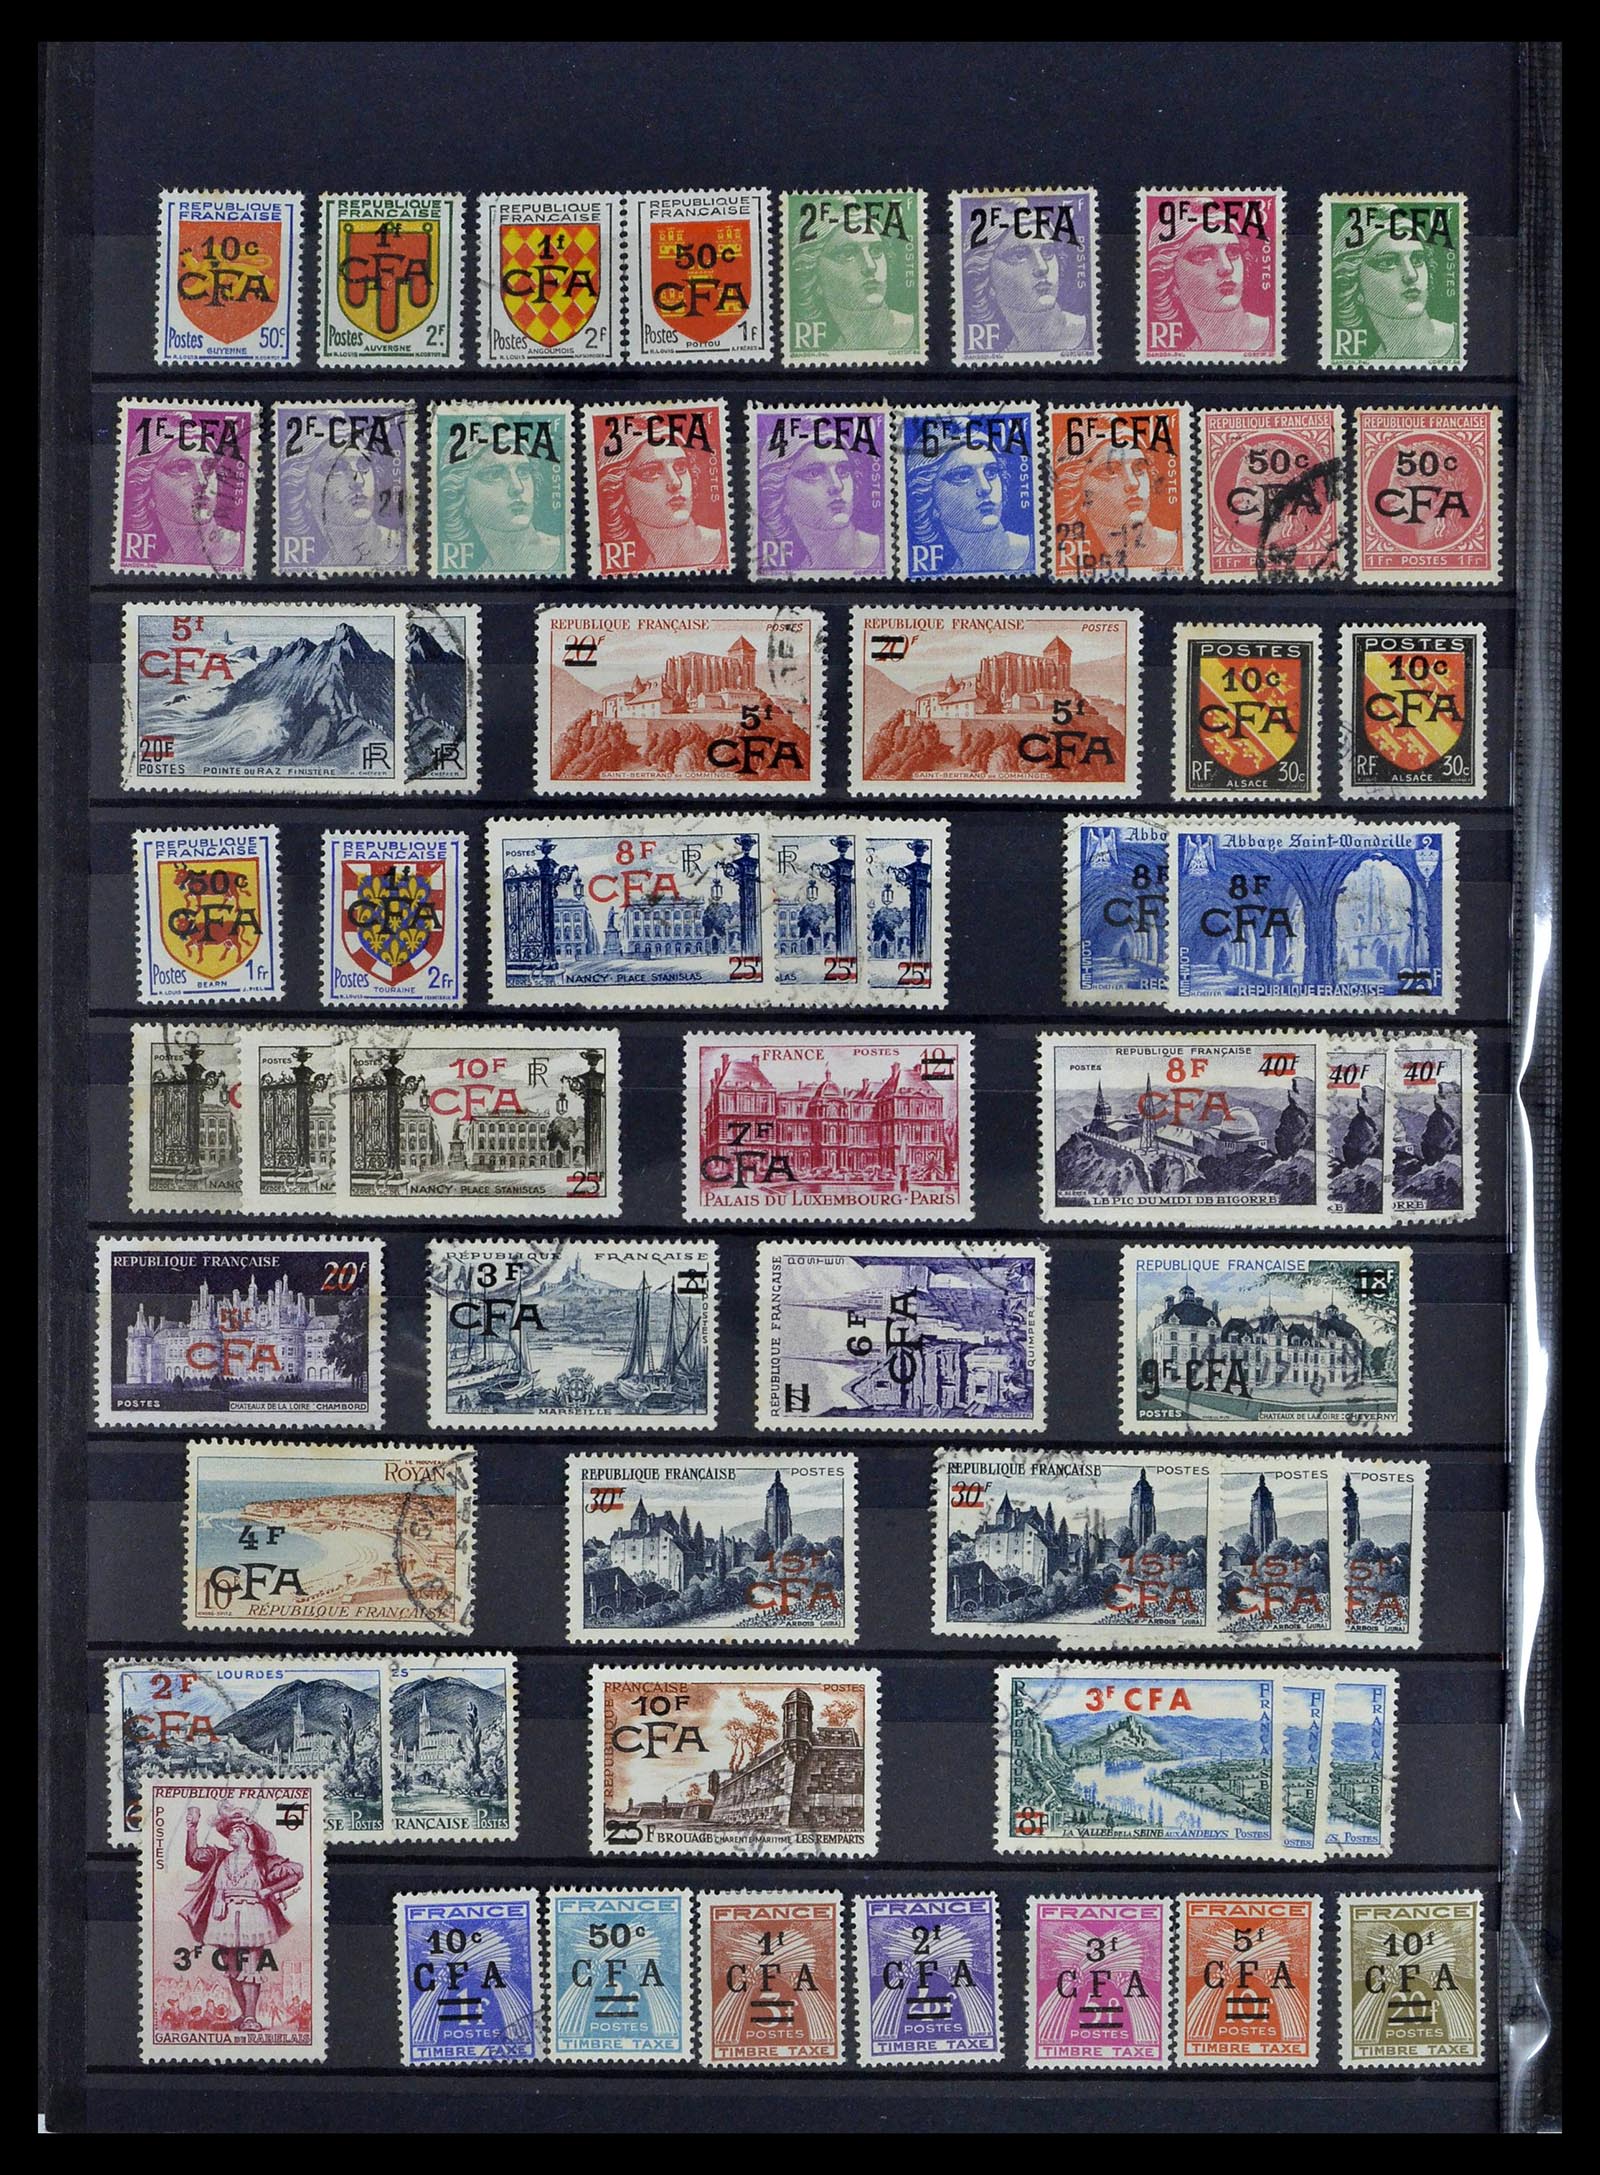 39097 0020 - Stamp collection 39097 French colonies 1880-2000.